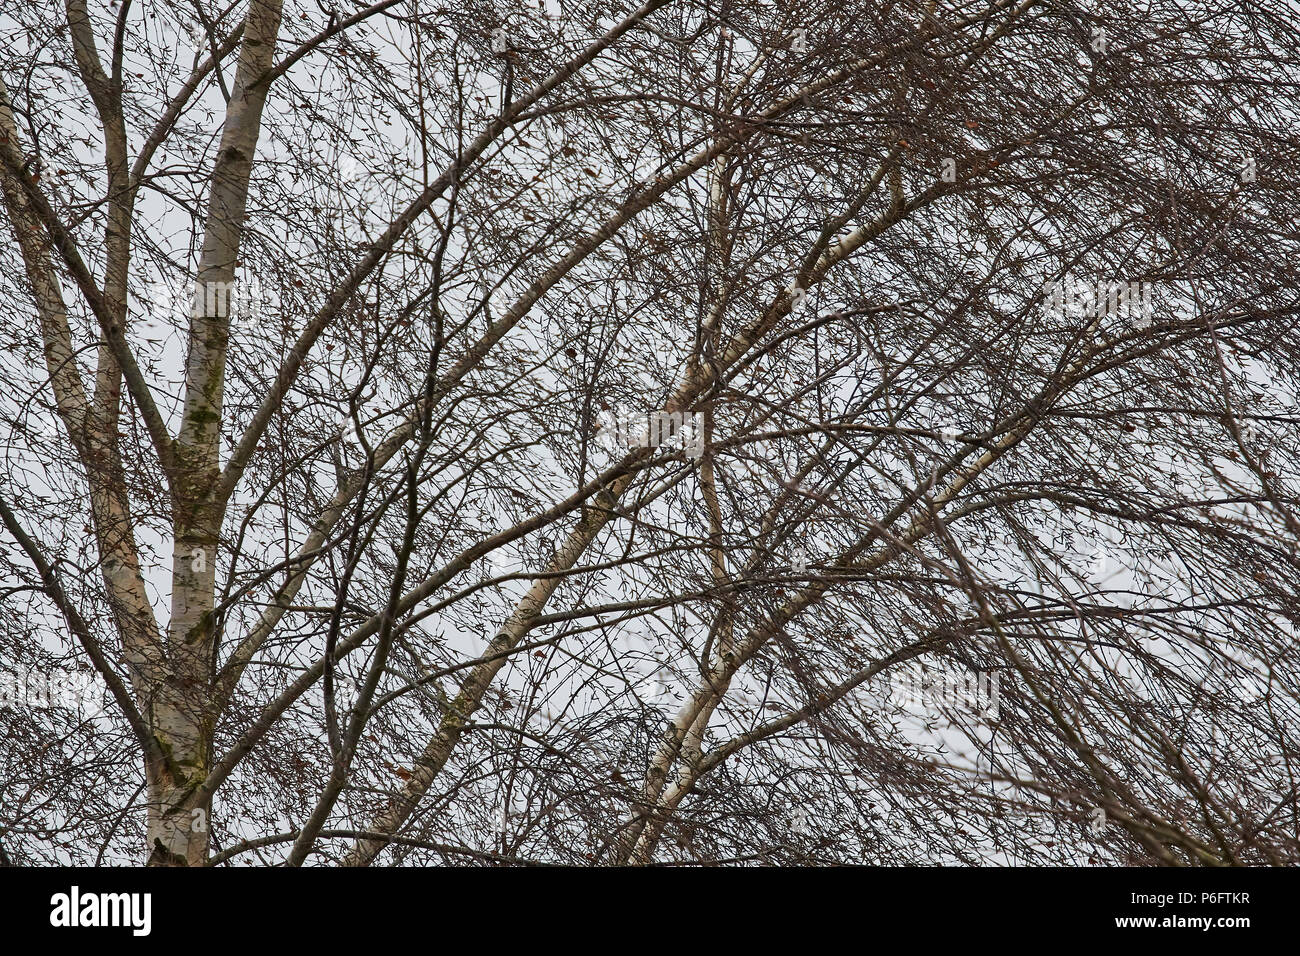 A full frame image of a Silver Birch (Betula Pendula) tree and branches with no leaves Stock Photo